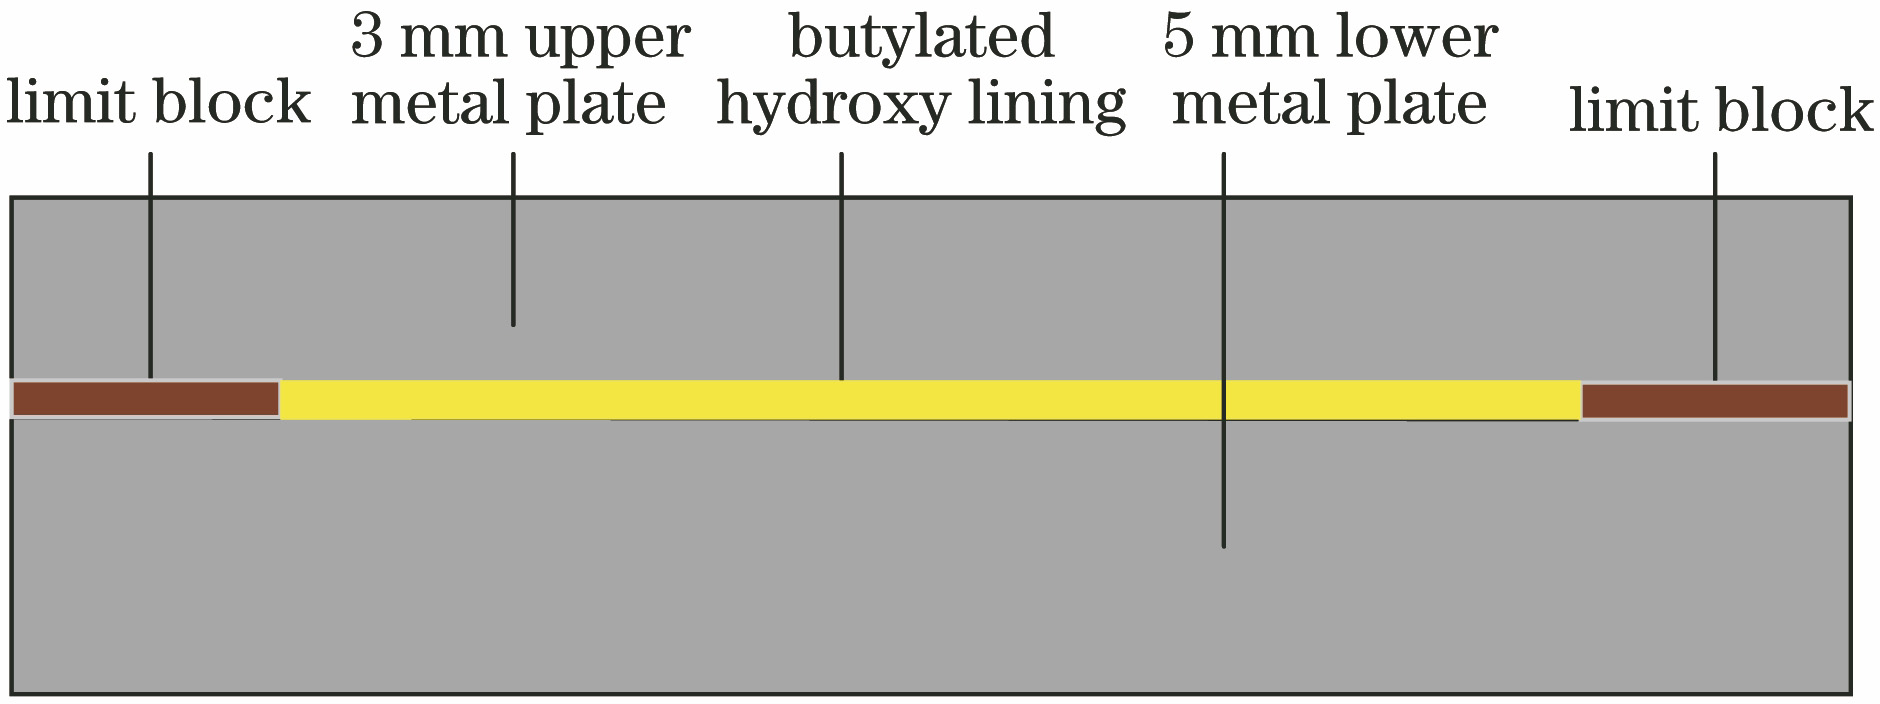 Cross-section view of lining bonding structure